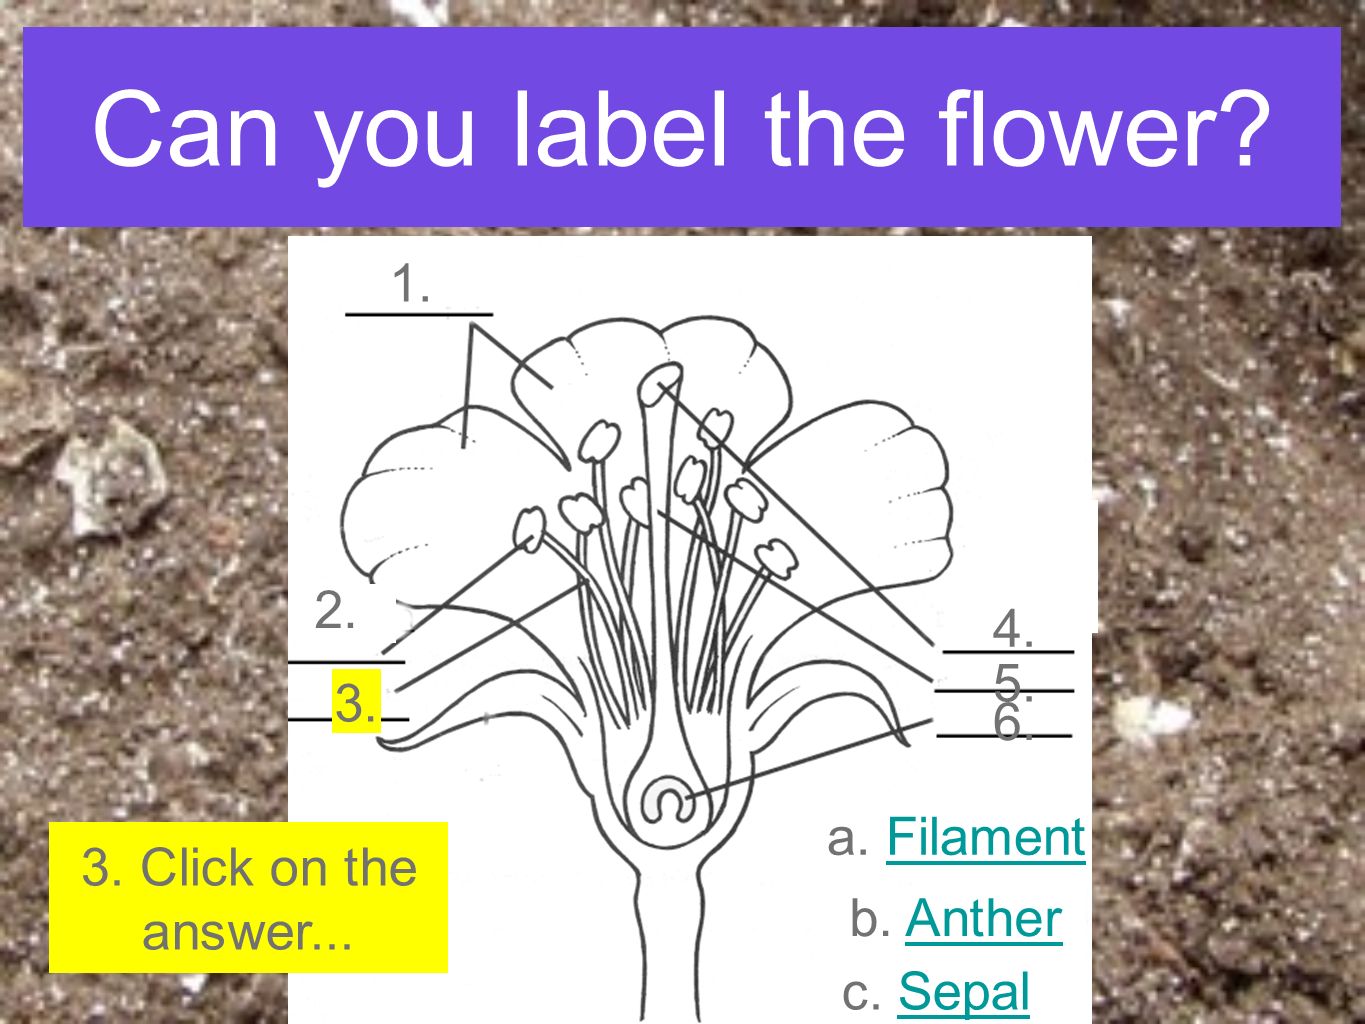 Can you label the flower